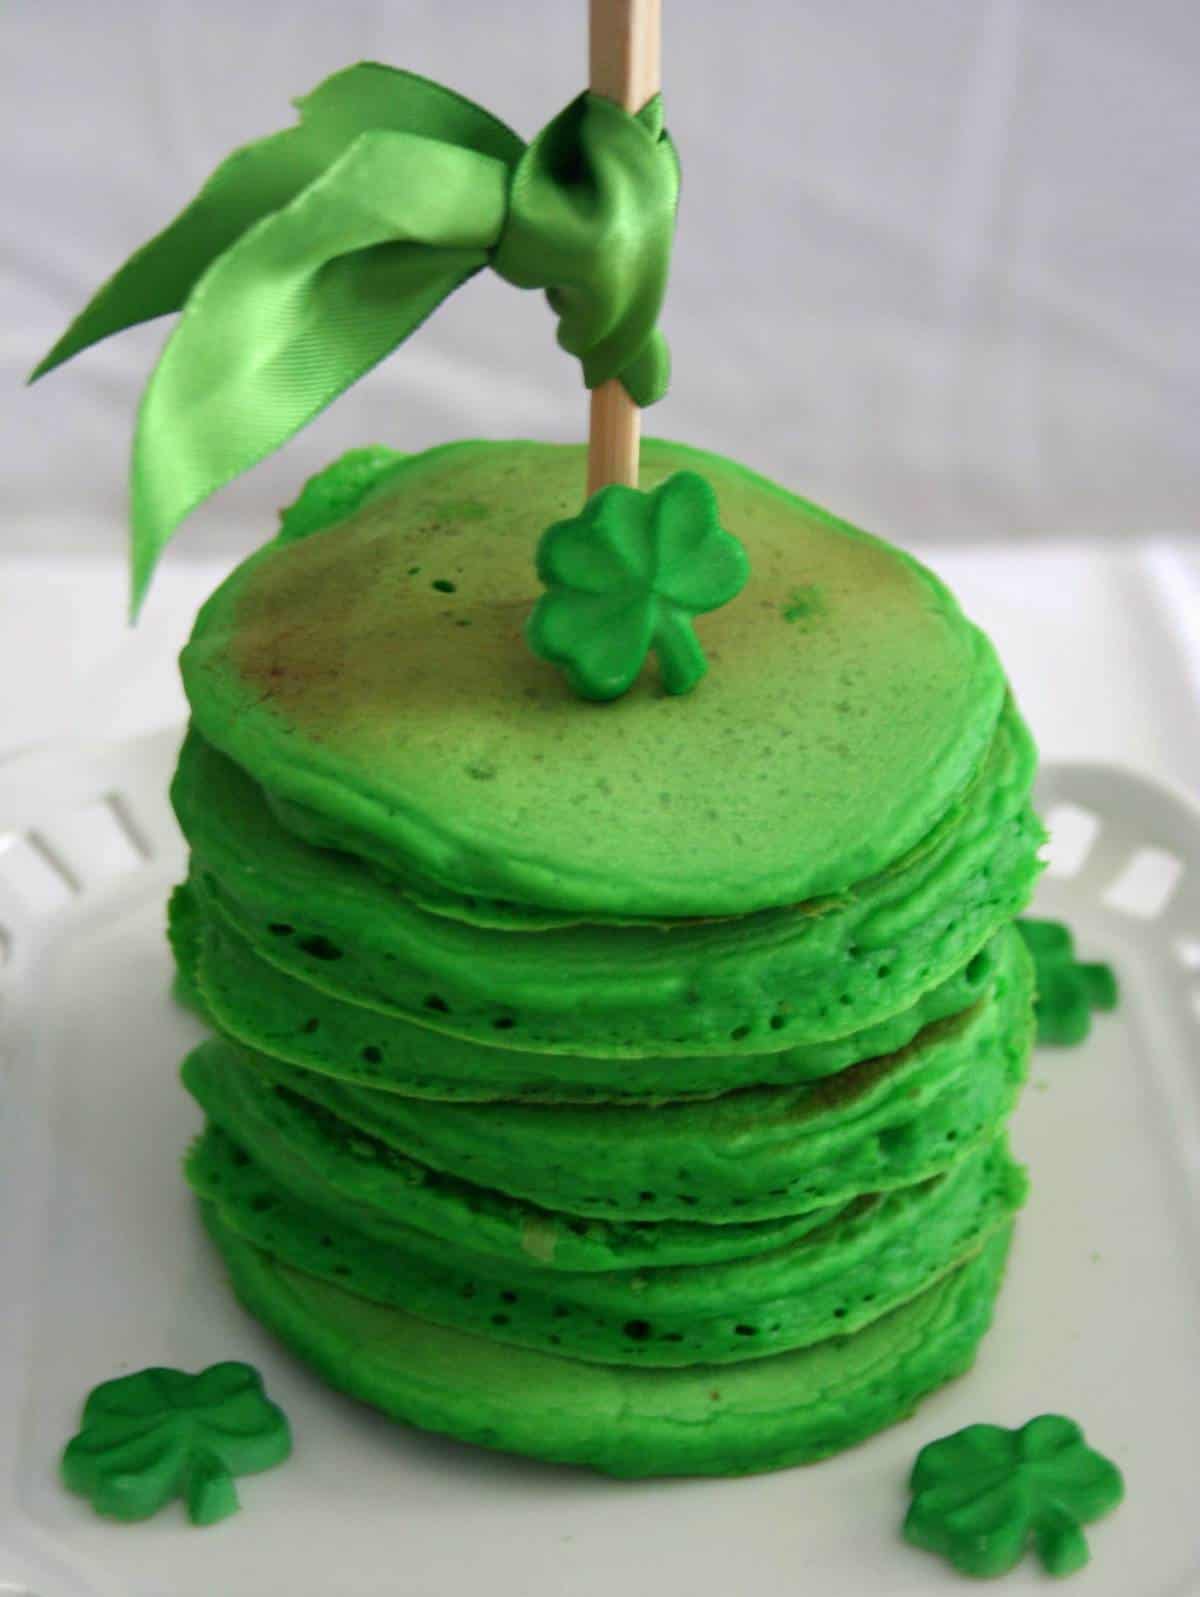 http://www.thoughtfullysimple.com/green-pancakes/